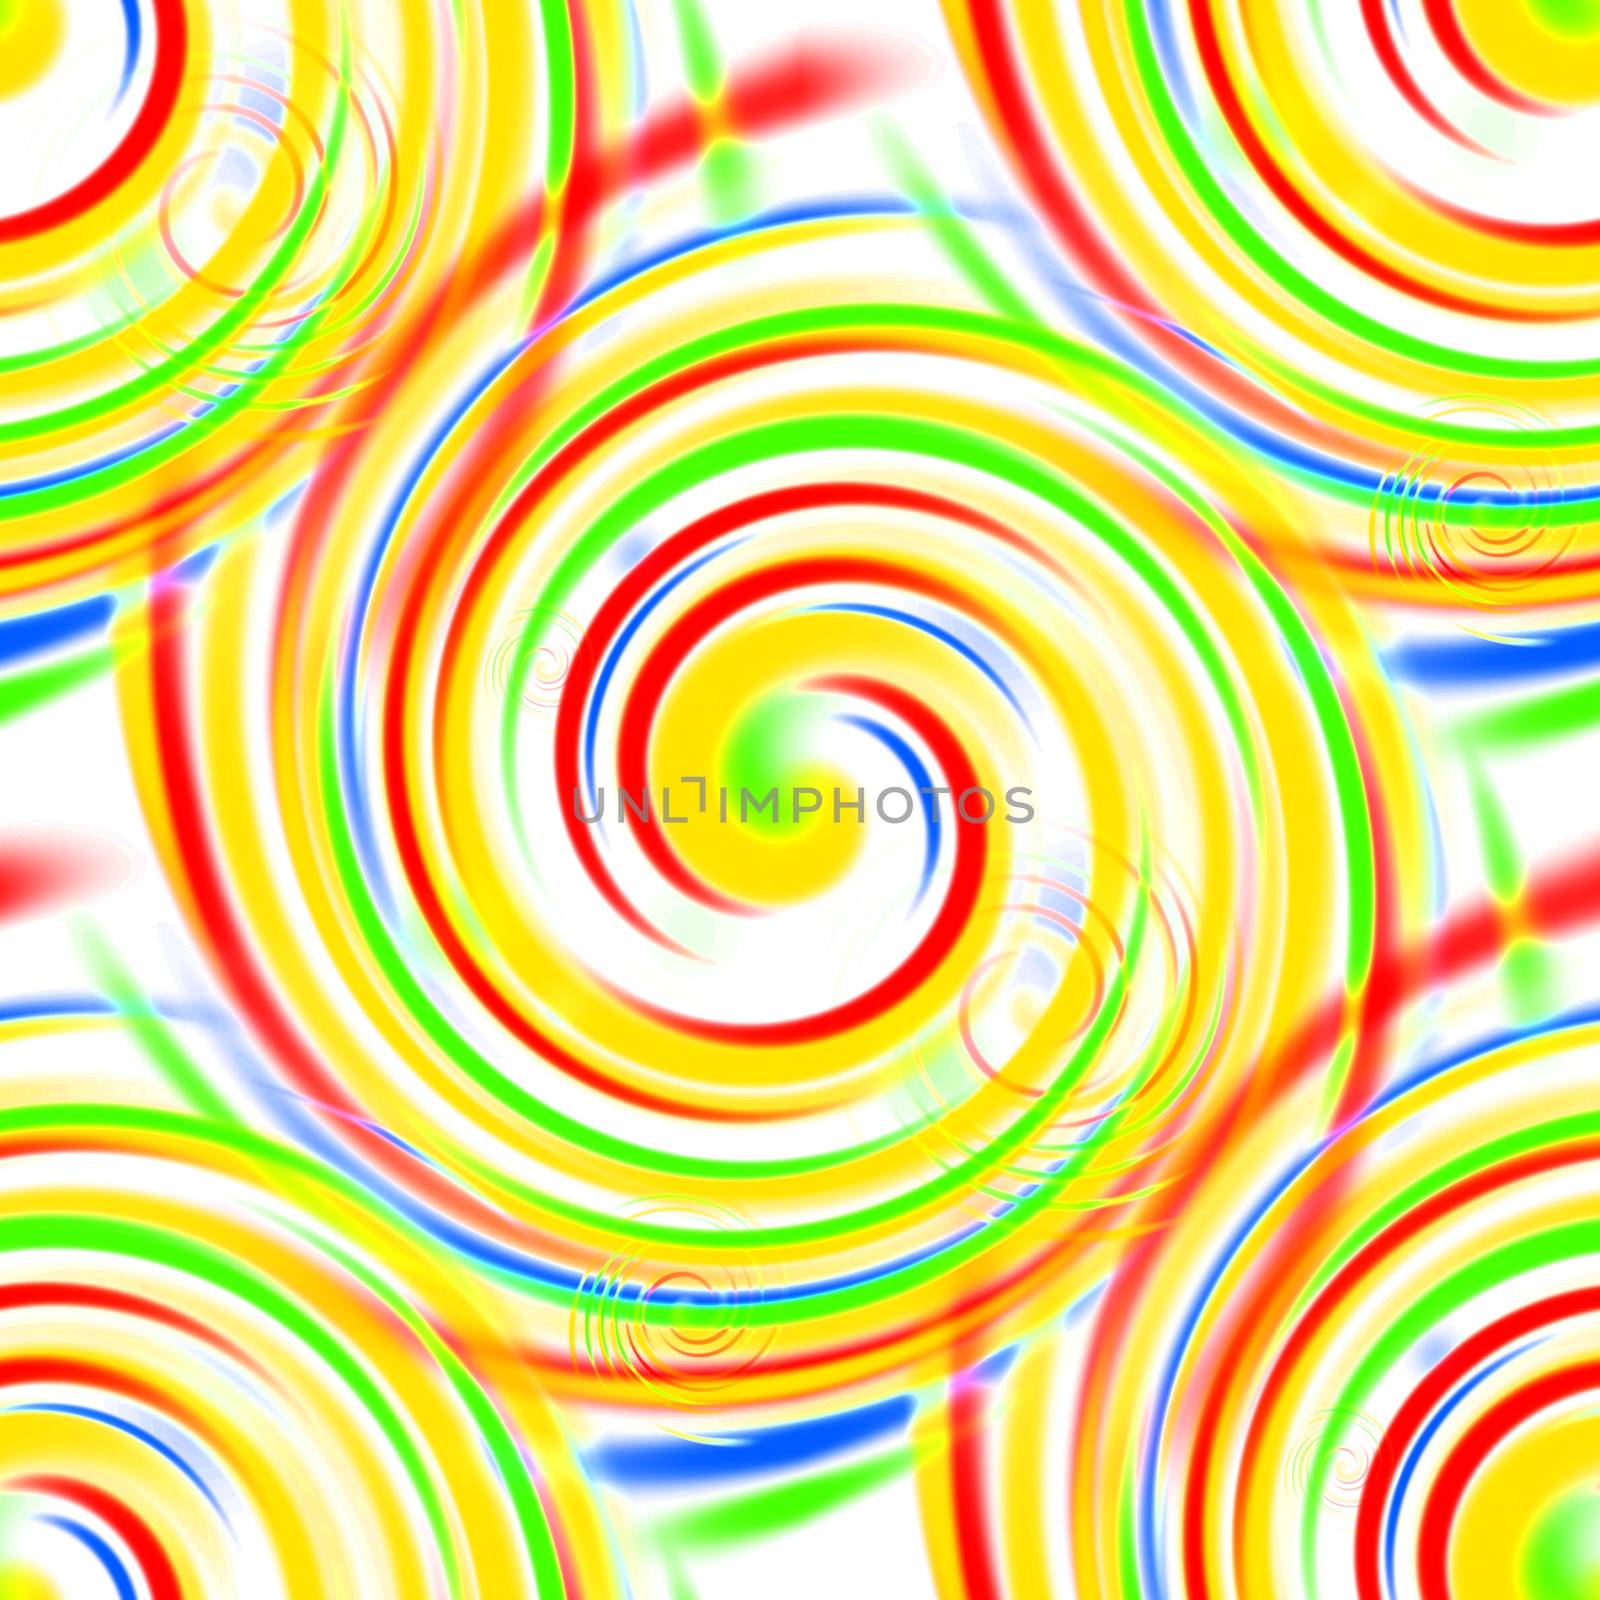 Multi color swirls background on white.